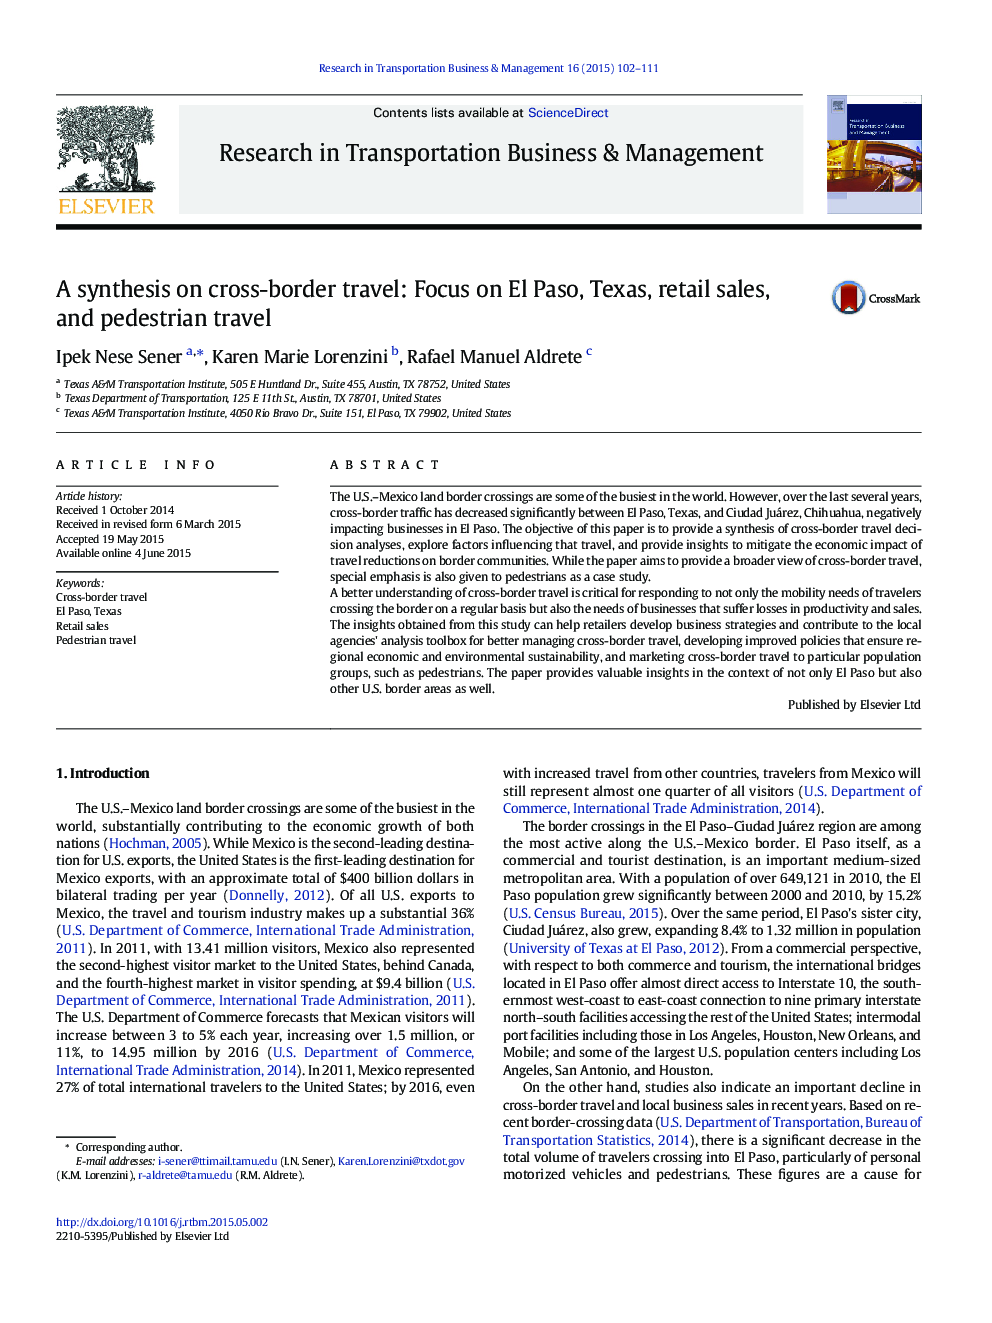 A synthesis on cross-border travel: Focus on El Paso, Texas, retail sales, and pedestrian travel